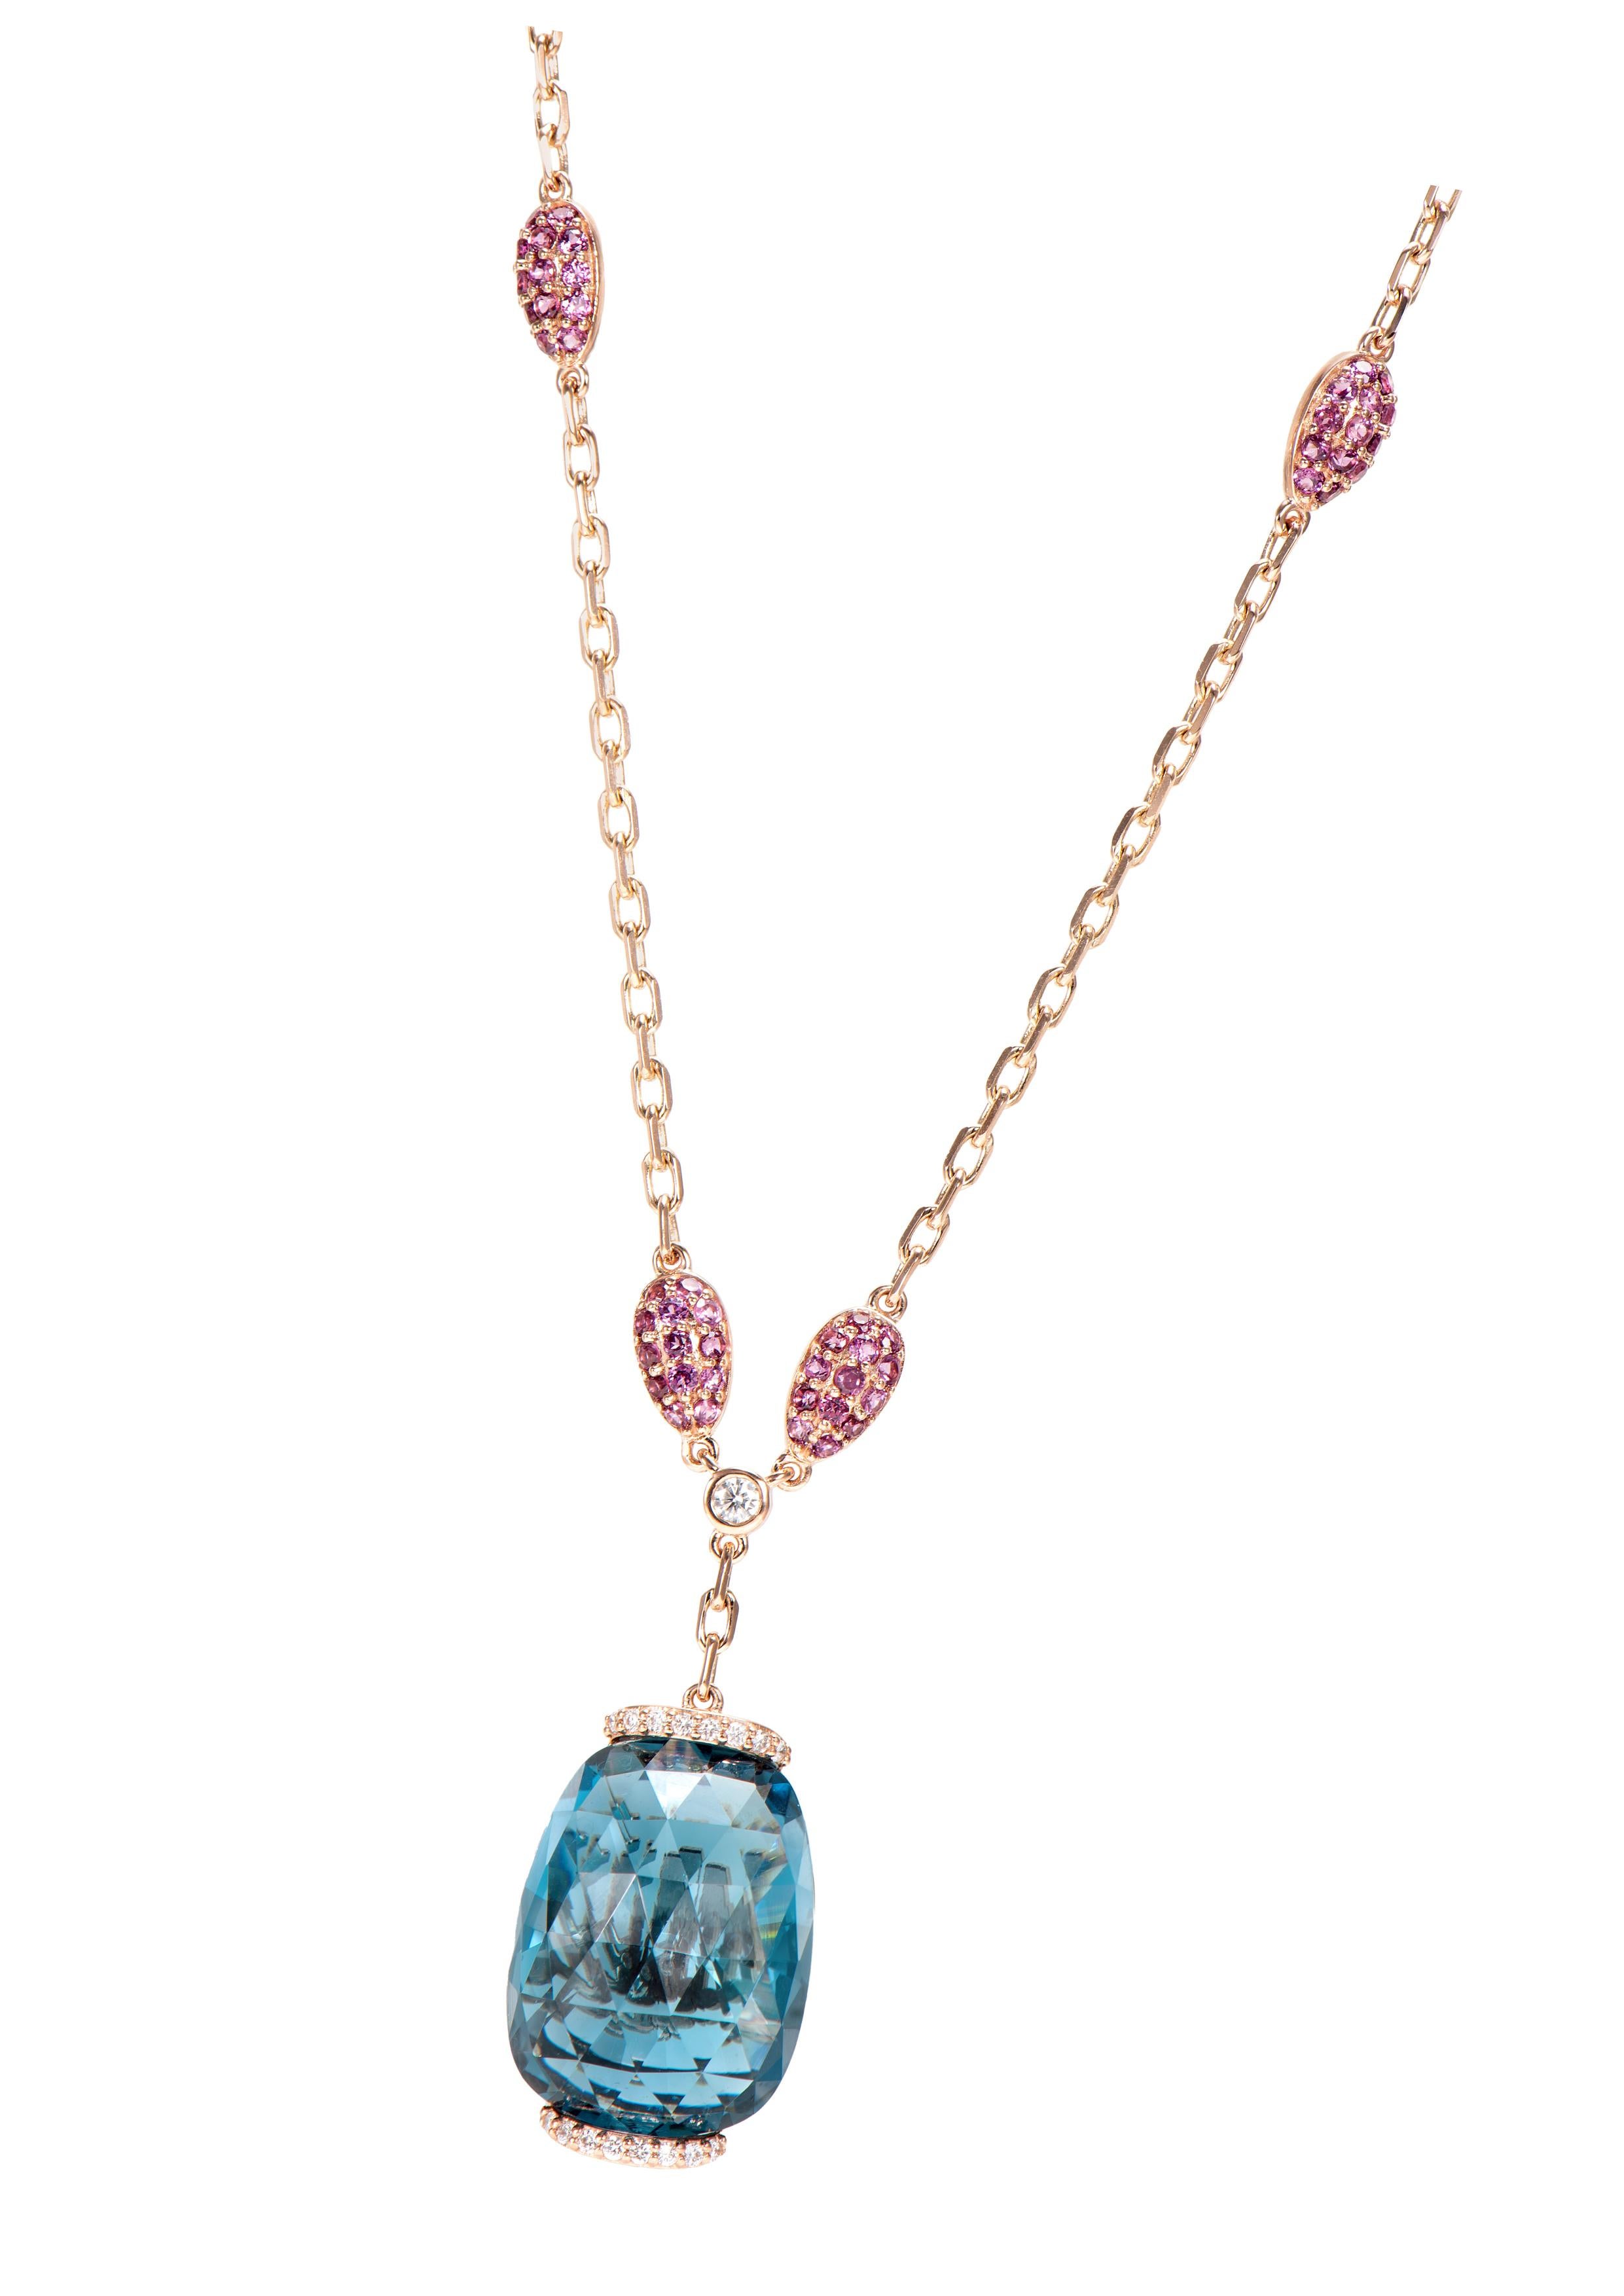 Cushion Cut London Blue Topaz Pendant with Rhodolite and White Diamond in 18 Karat Rose Gold For Sale